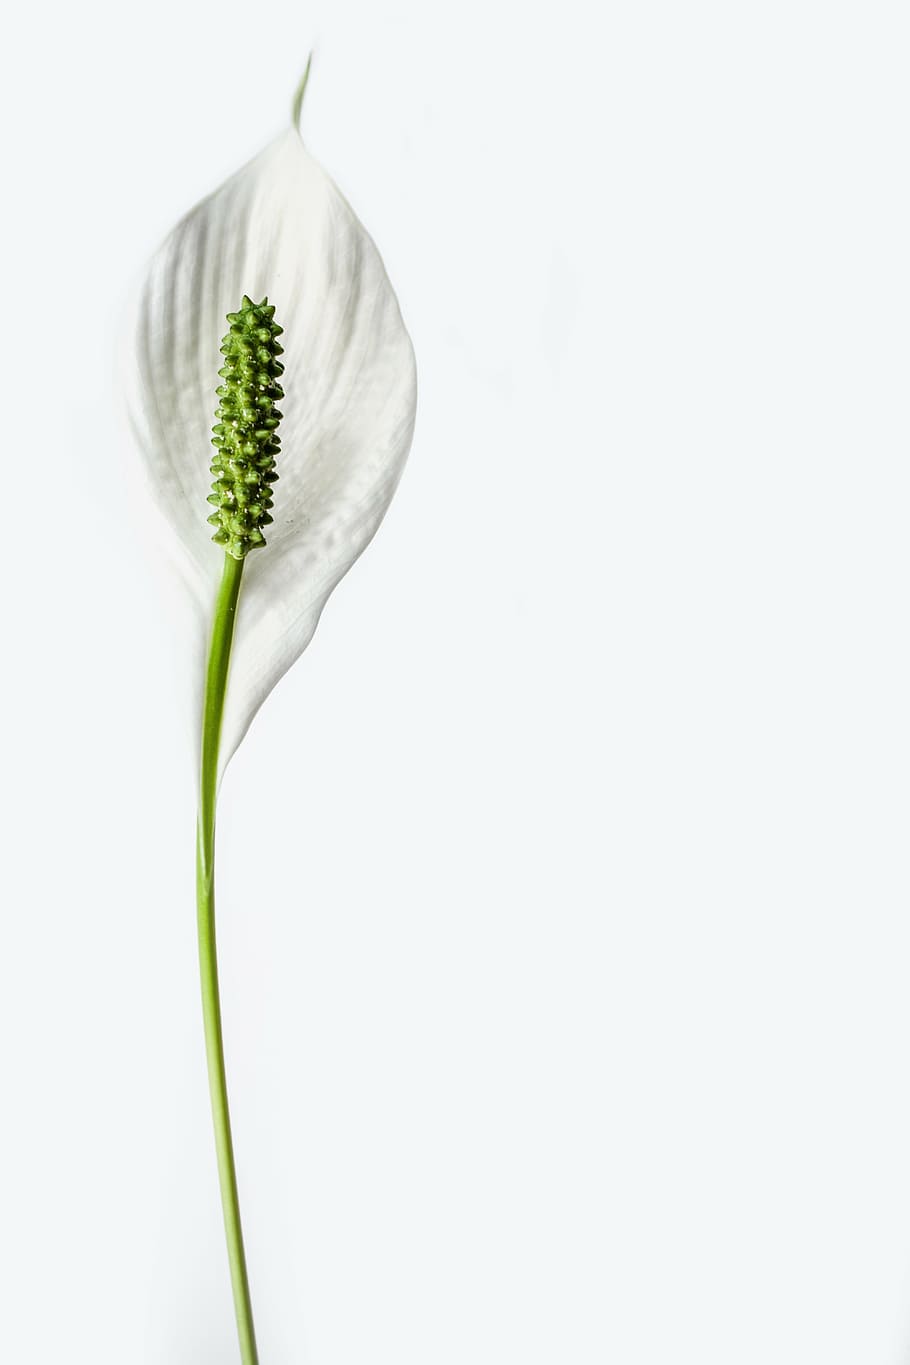 peace lily flower, closeup, peace lily, flower, plant, lily, bloom, botany, isolated, single